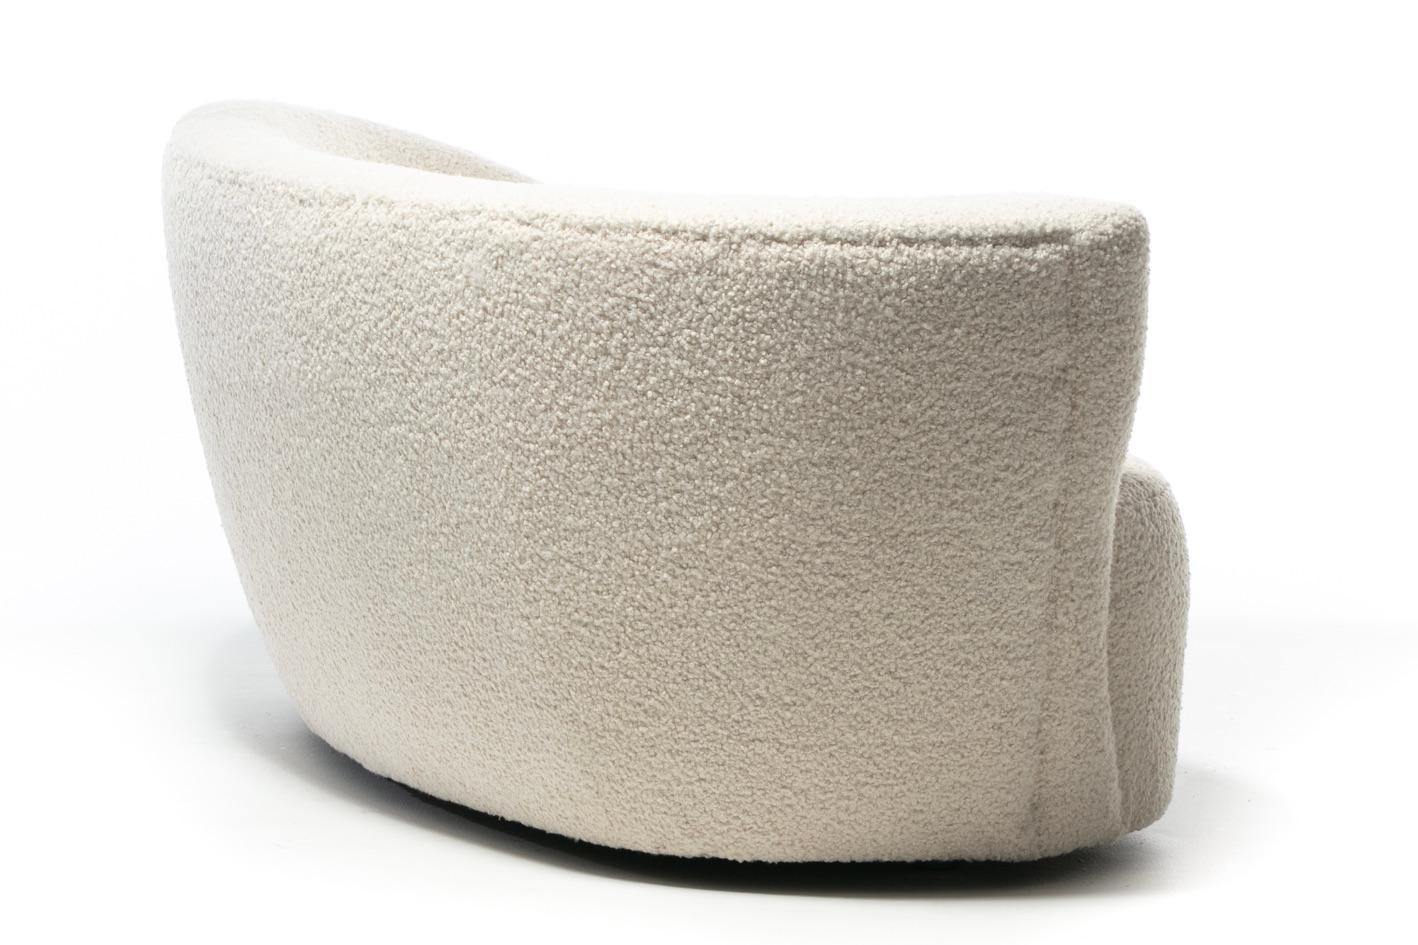 Vladimir Kagan Nautilus Sofa in Ivory White Bouclé by Directional, c. 1990 For Sale 6